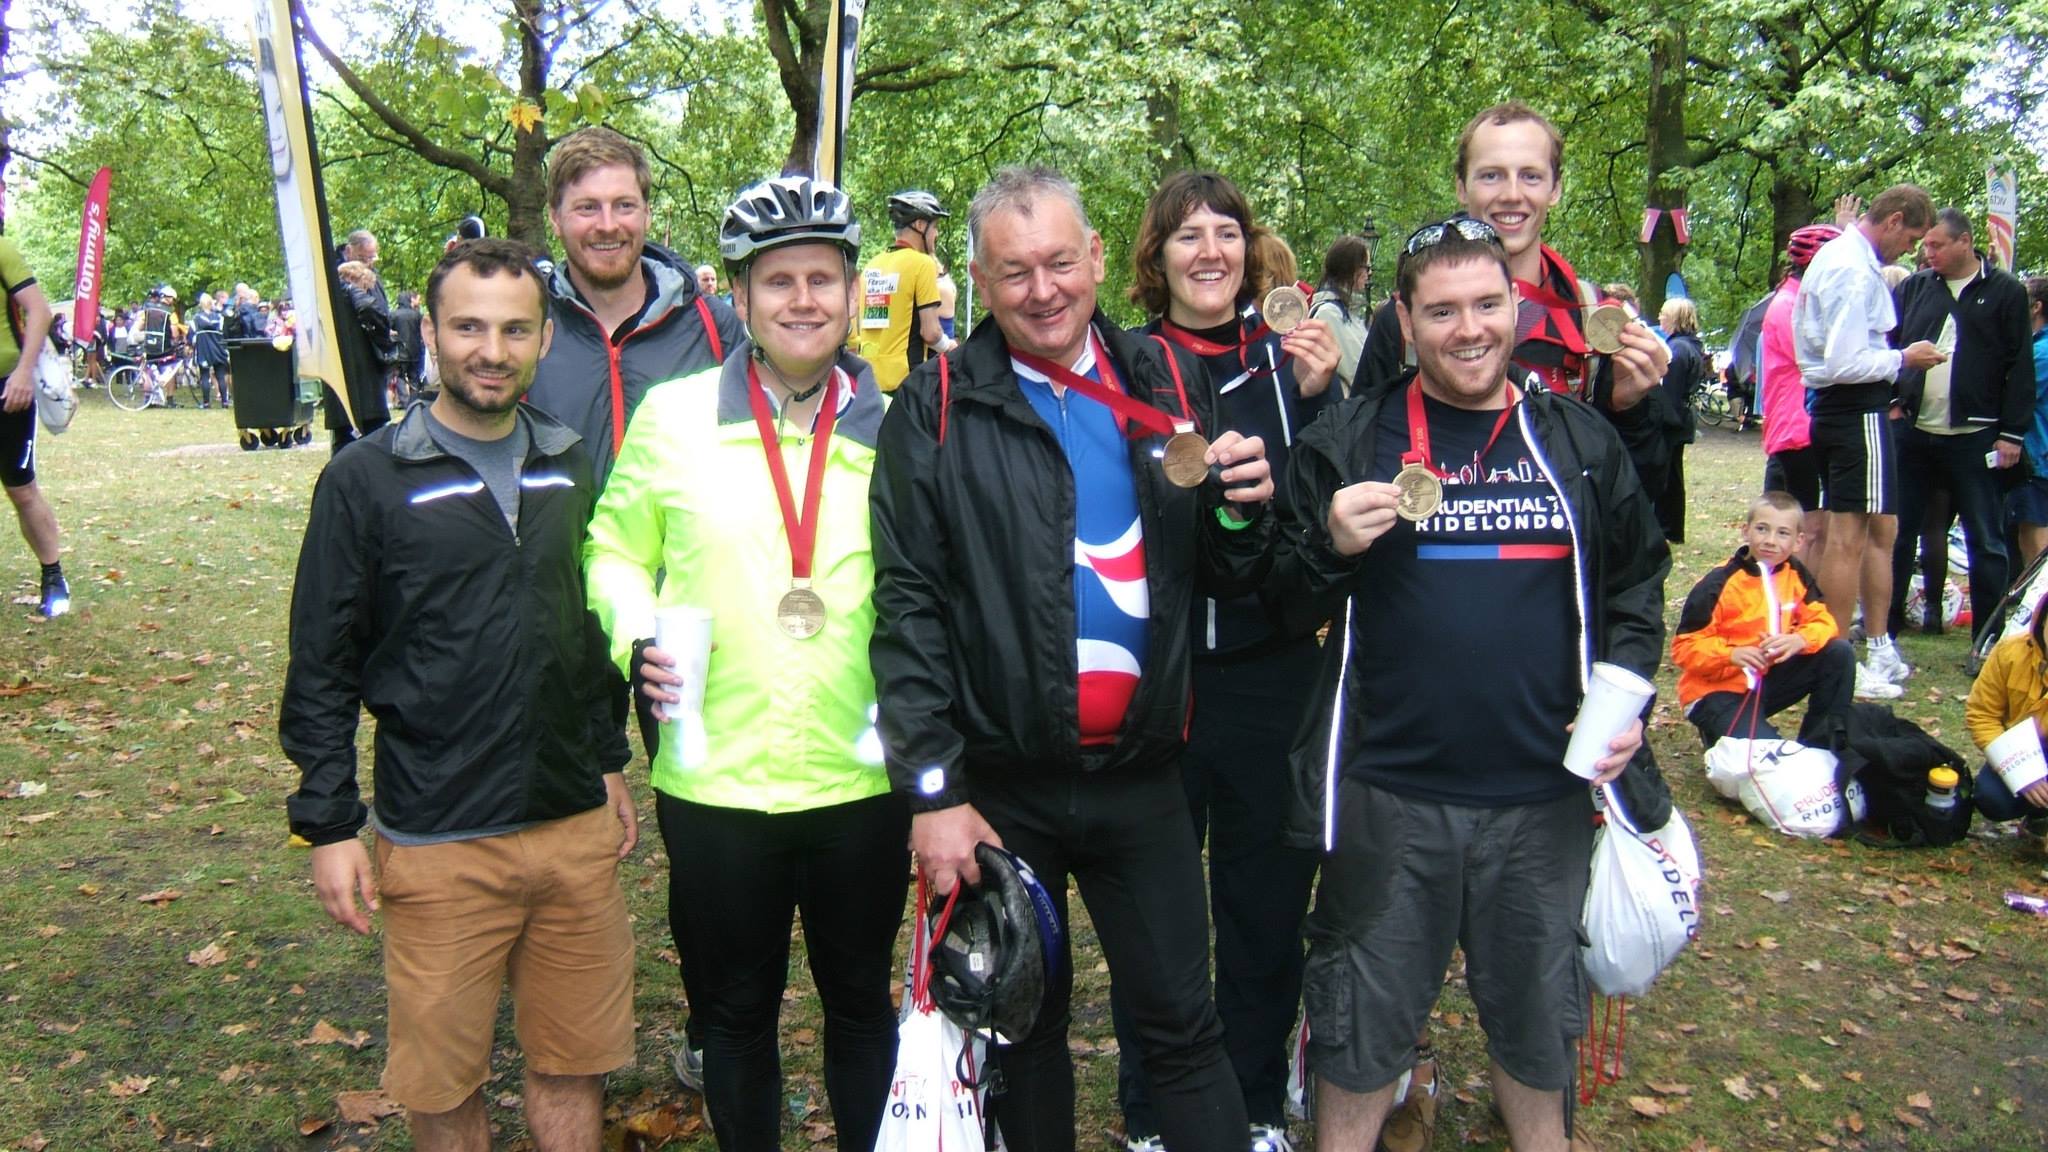 Team members looking happy with their medals at the end of the race